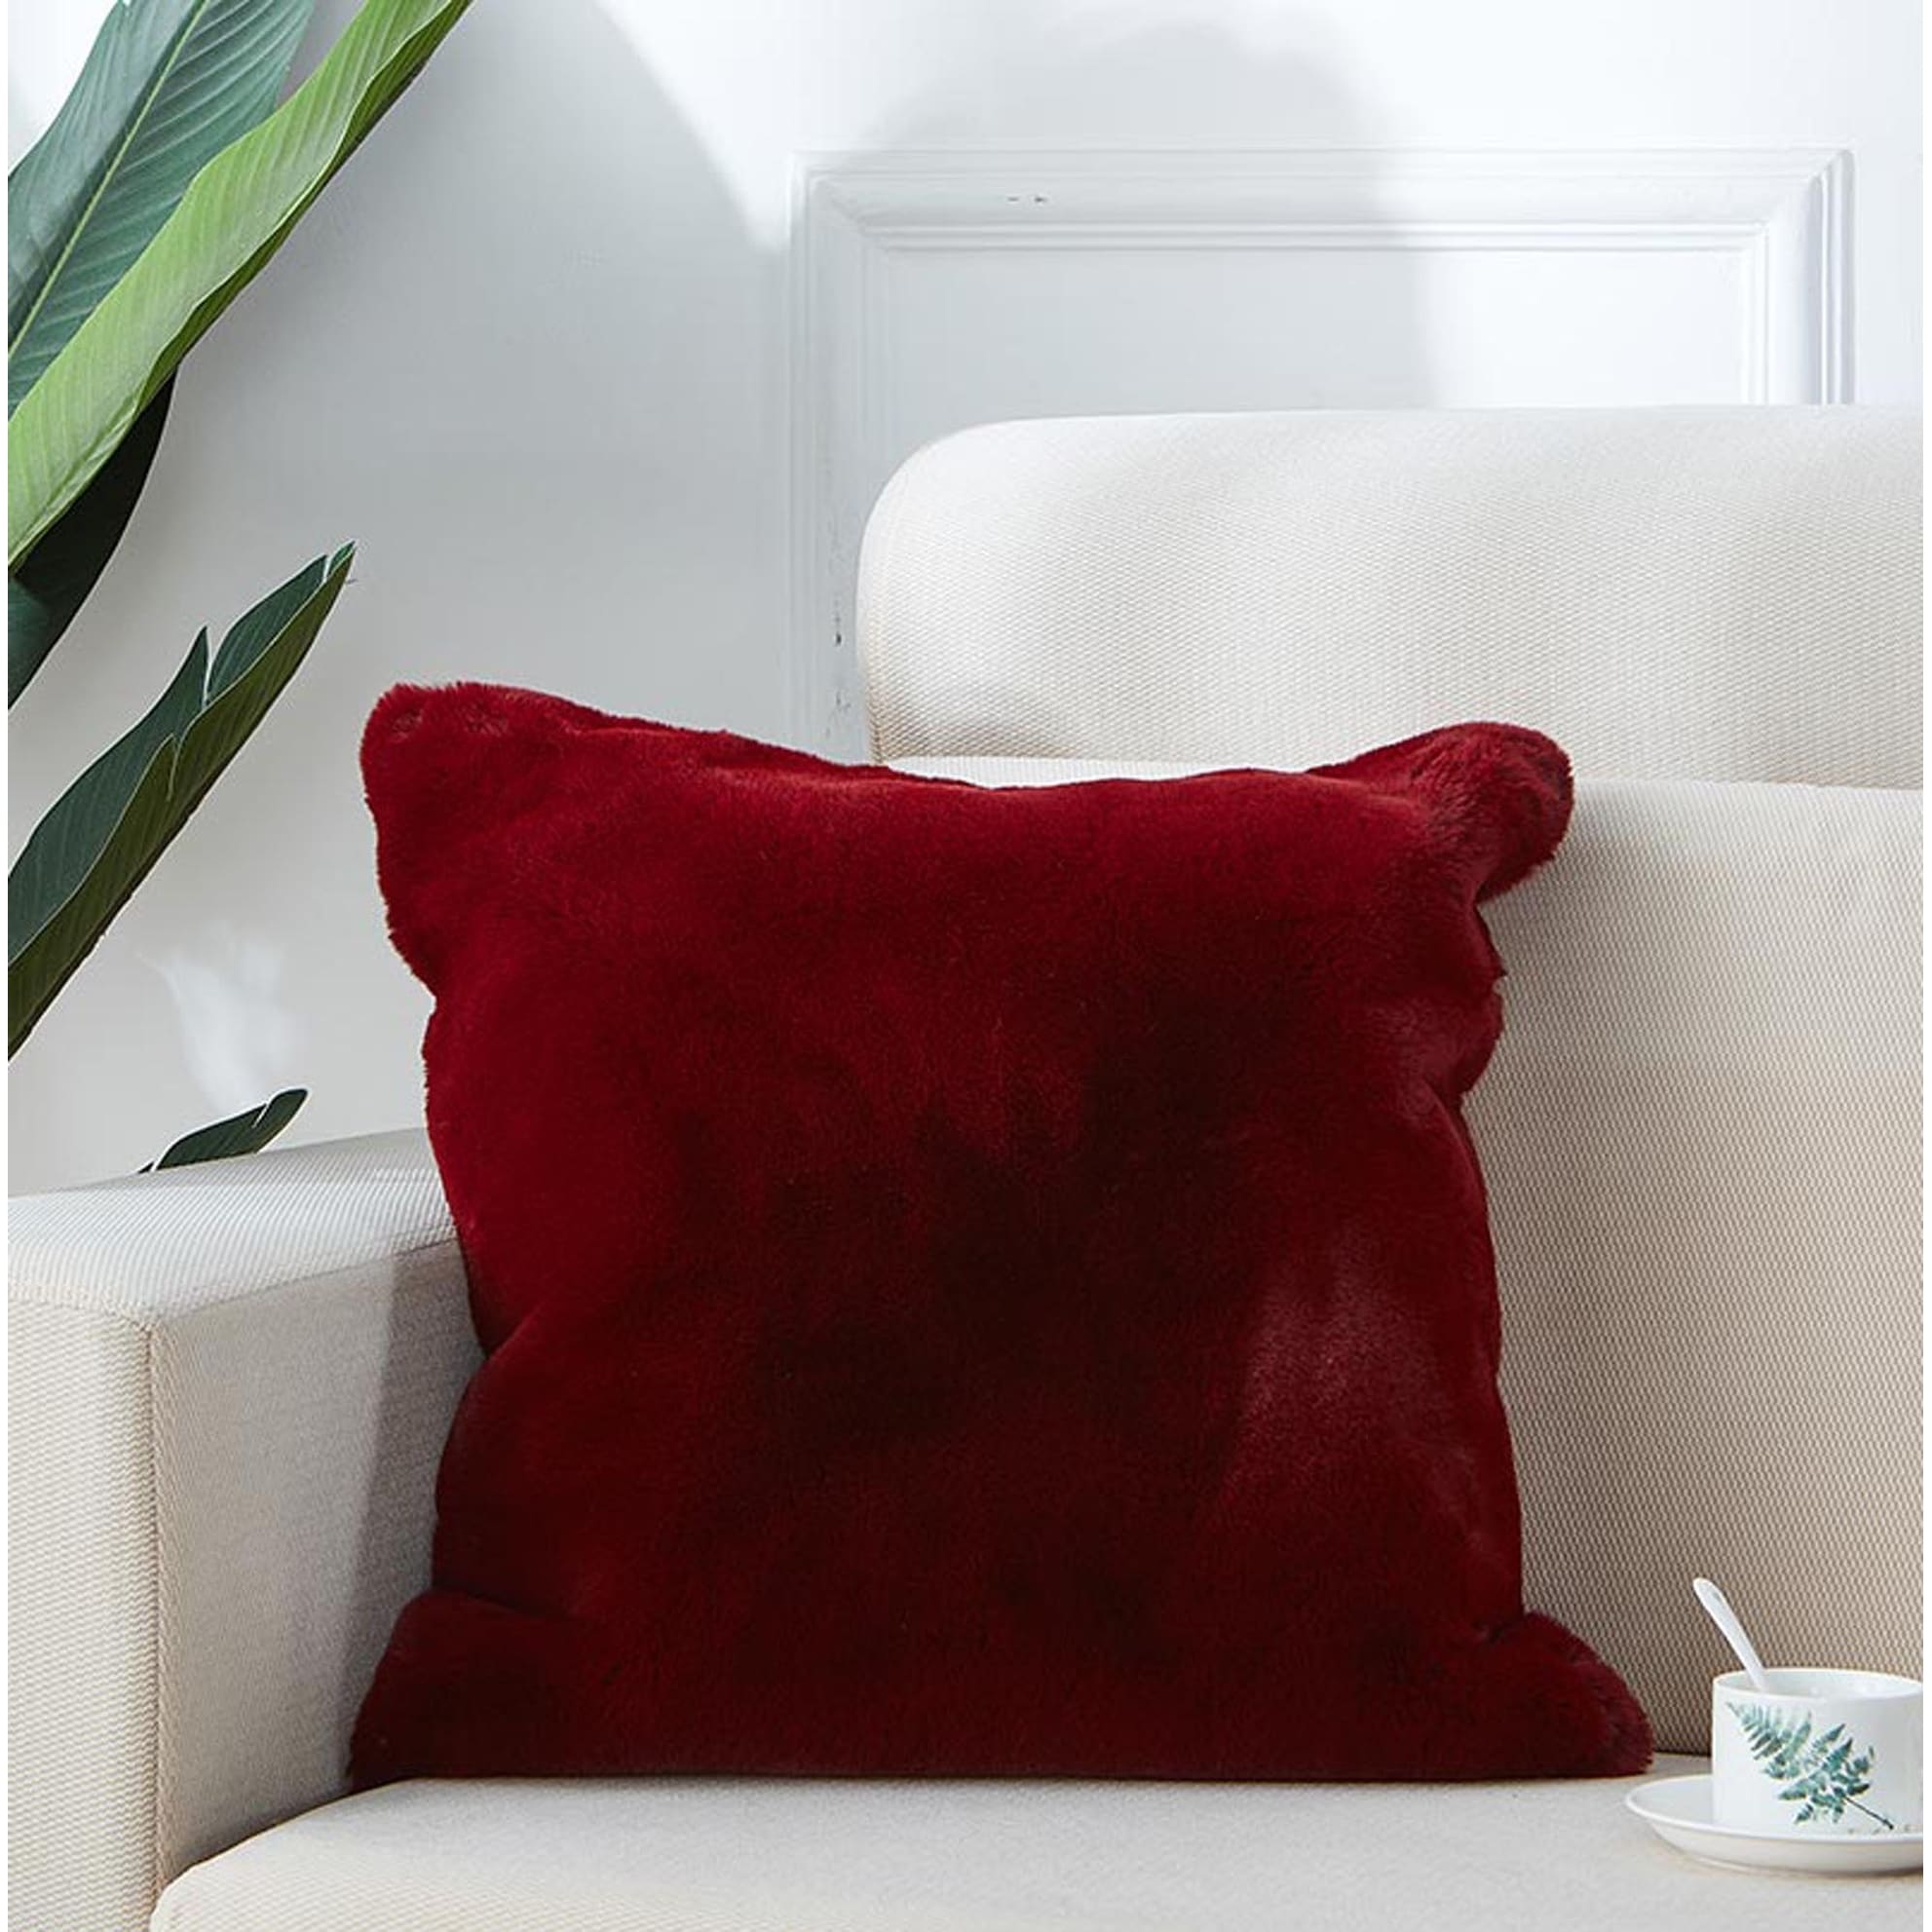 https://ak1.ostkcdn.com/images/products/is/images/direct/06be6309ac6148d552ea52bd766638e8db690869/18-inch-Square-luxury-Fur-Throw-Pillow.jpg